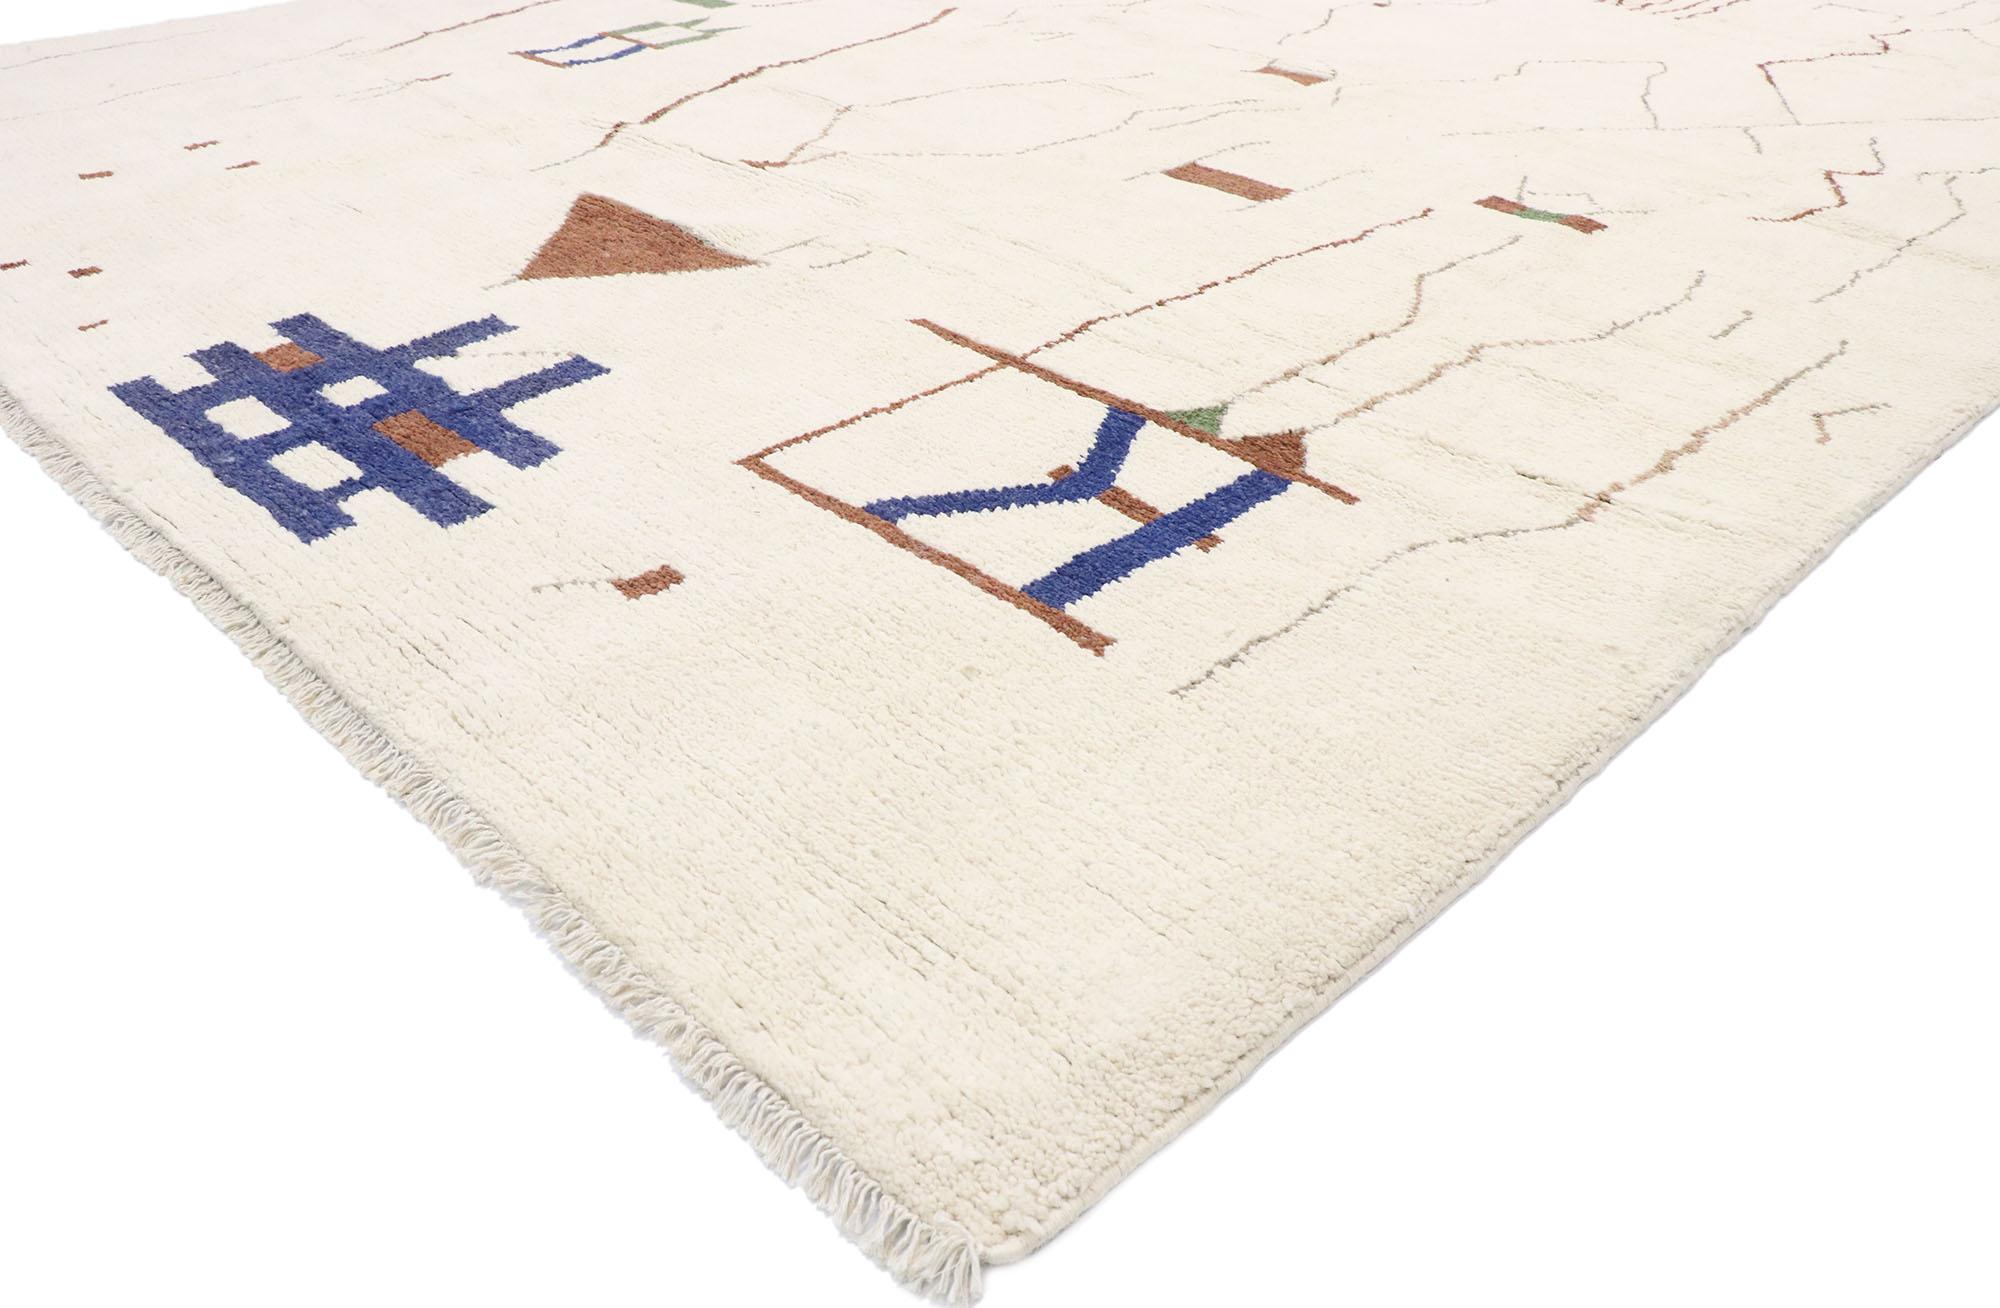 80646, new contemporary Moroccan Area rug with Brutalist style inspired by Harry Bertoia. Recalling the Brutalist influence of midcentury designer Harry Bertoia (1915-1978), this contemporary oversized Moroccan rug is an amalgam of International